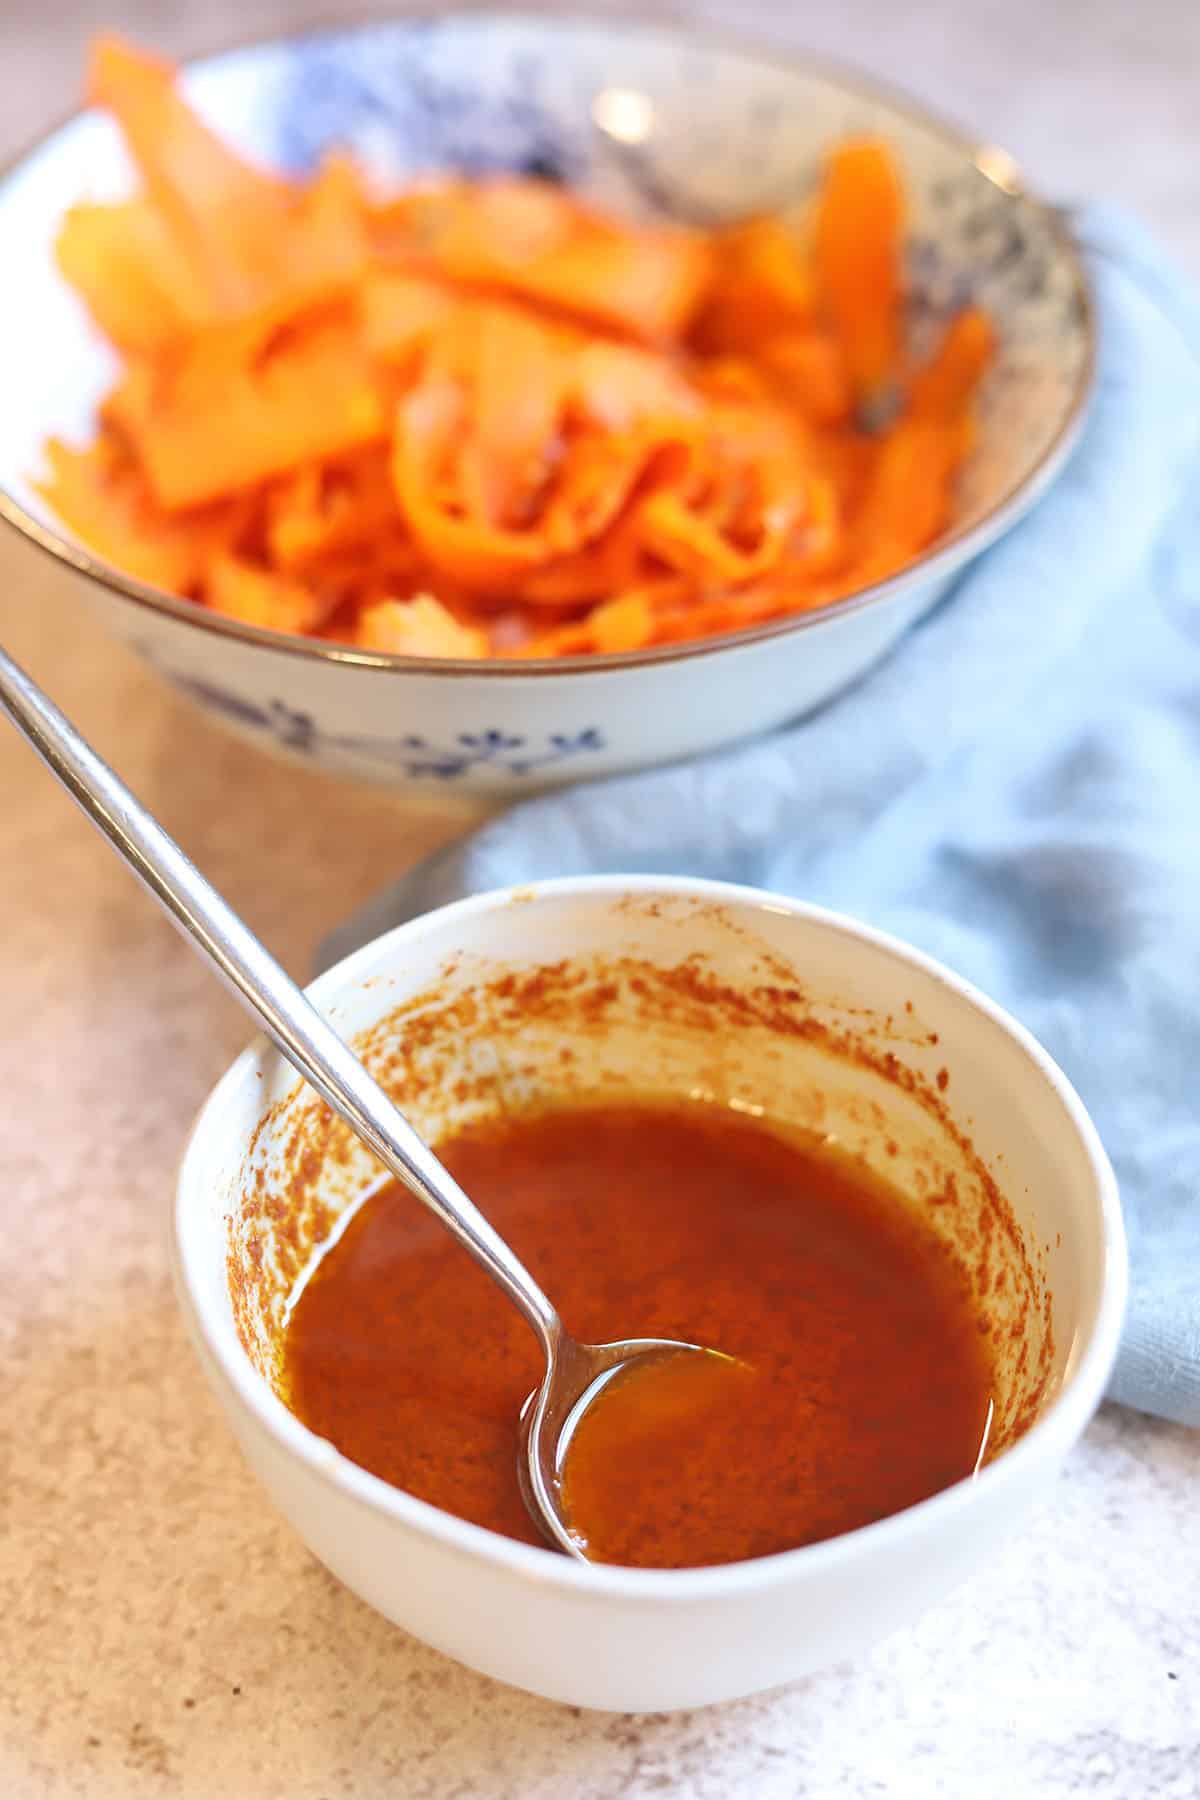 Marinade for carrot lox by shredded carrot ribbons in bowl.